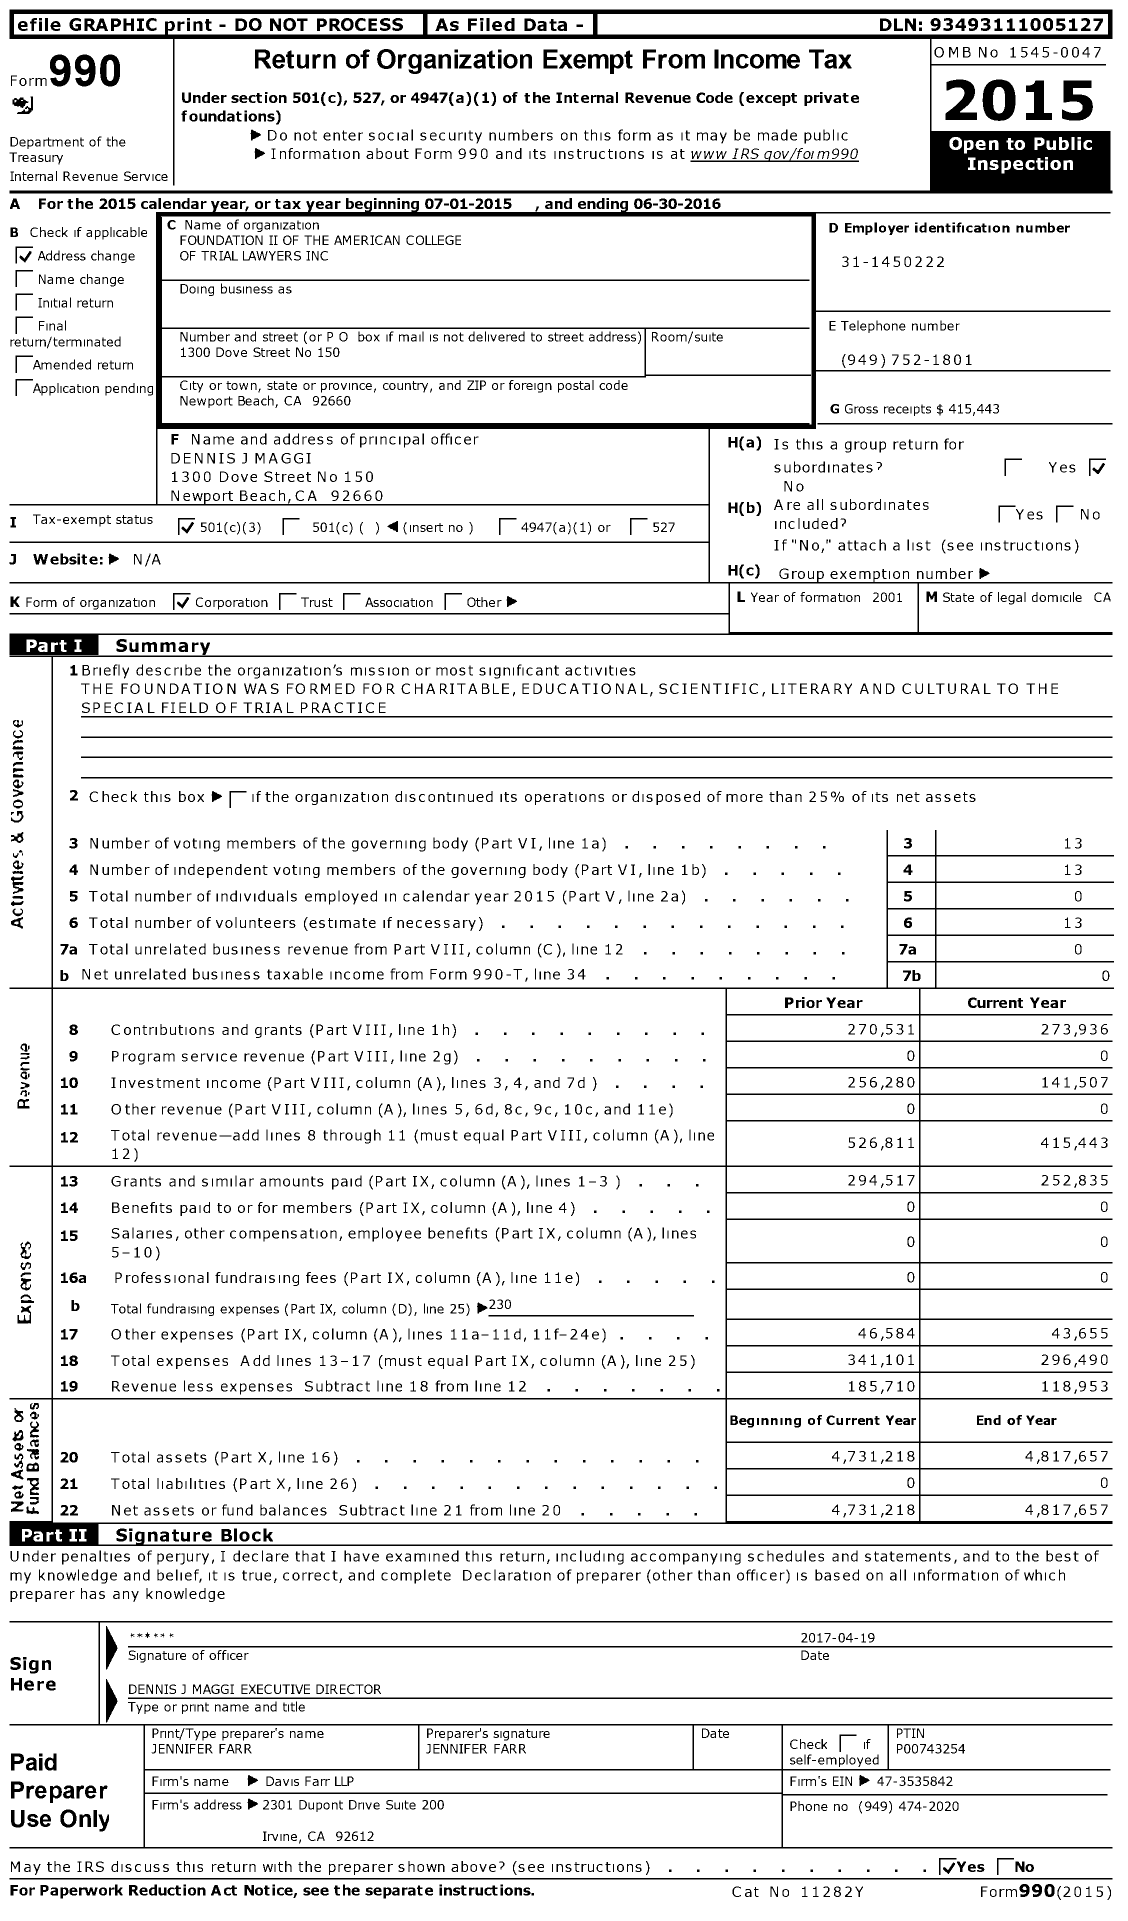 Image of first page of 2015 Form 990 for Foundation Ii of the American College of Trial Lawyers